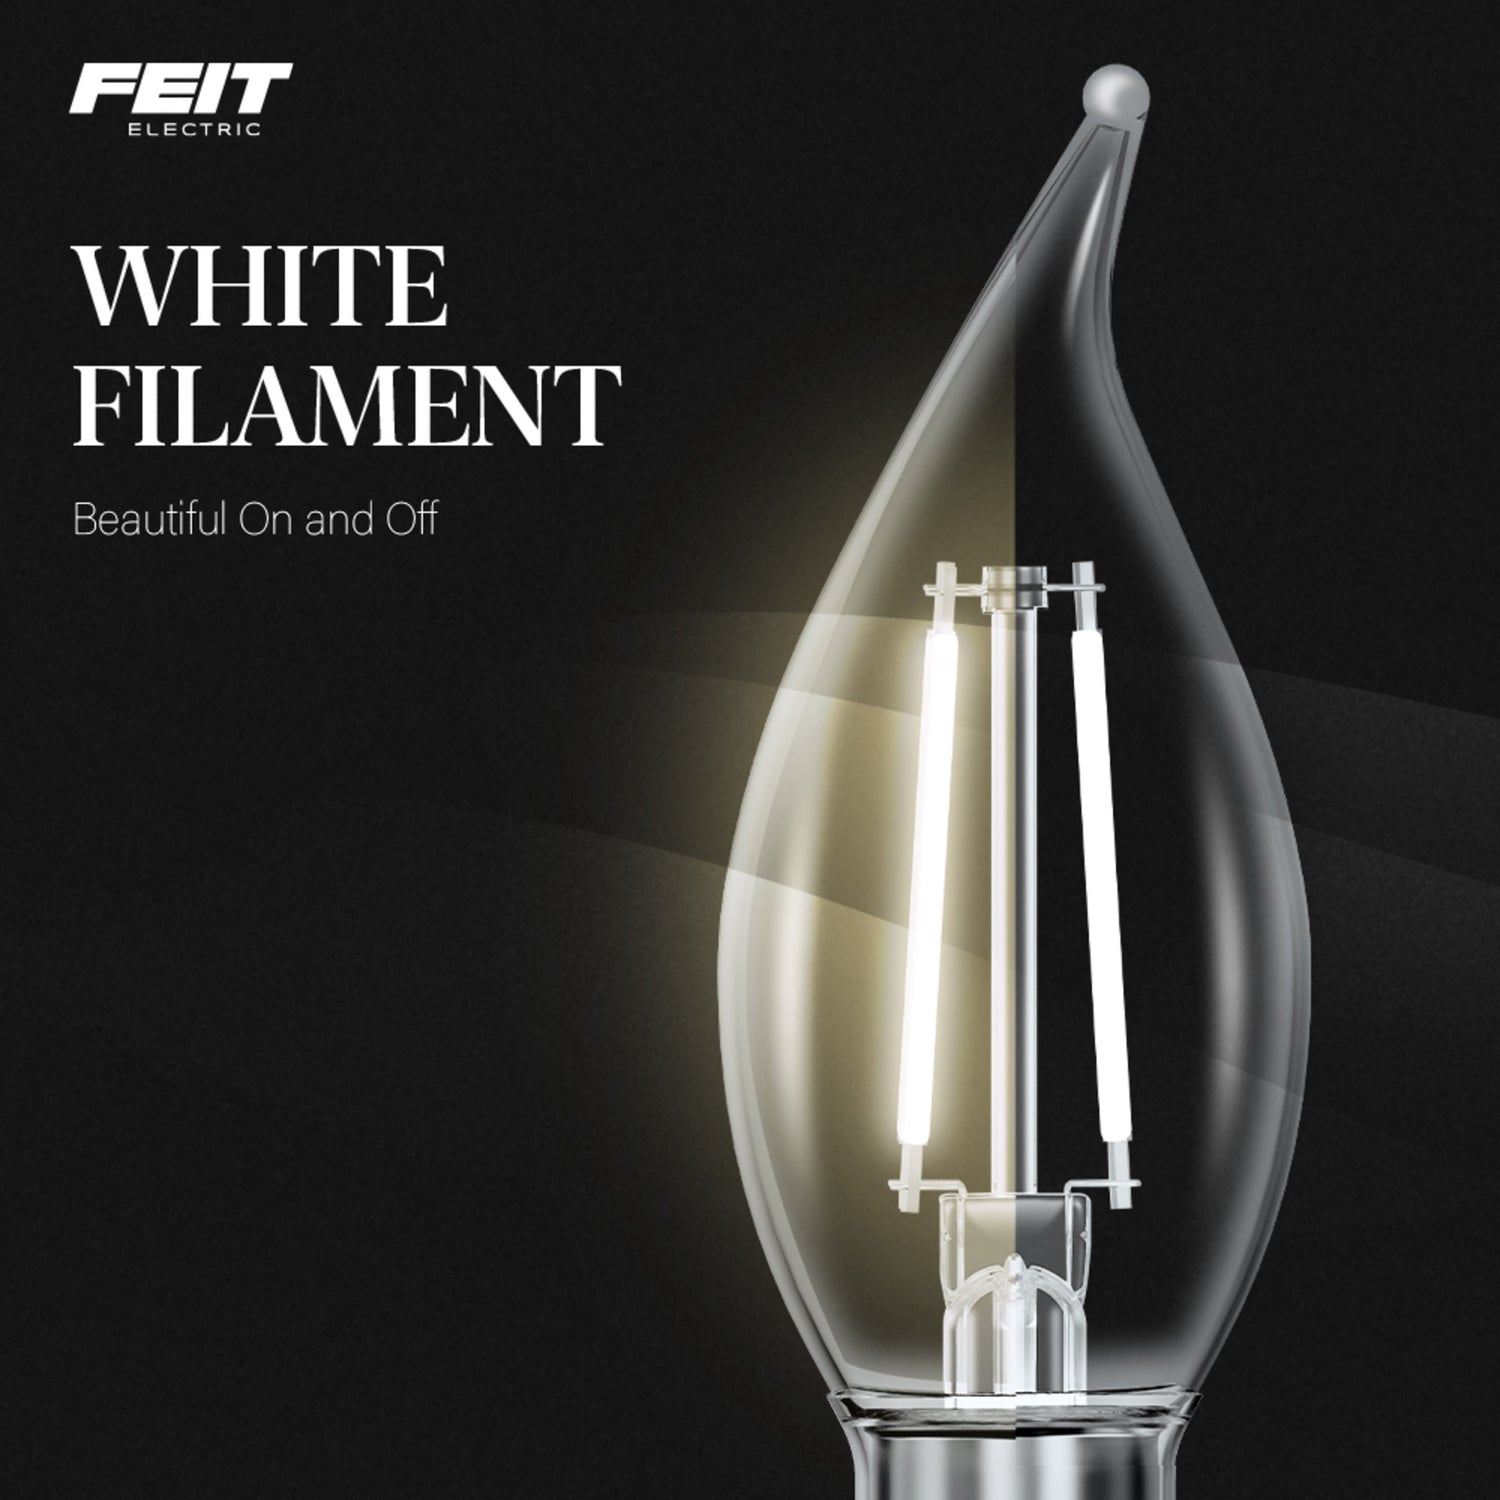 2.2W (25W Replacement) Soft White (2700K) Flame Tip BA10 (E12 Base) Exposed White Filament LED Bulb (3-Pack)